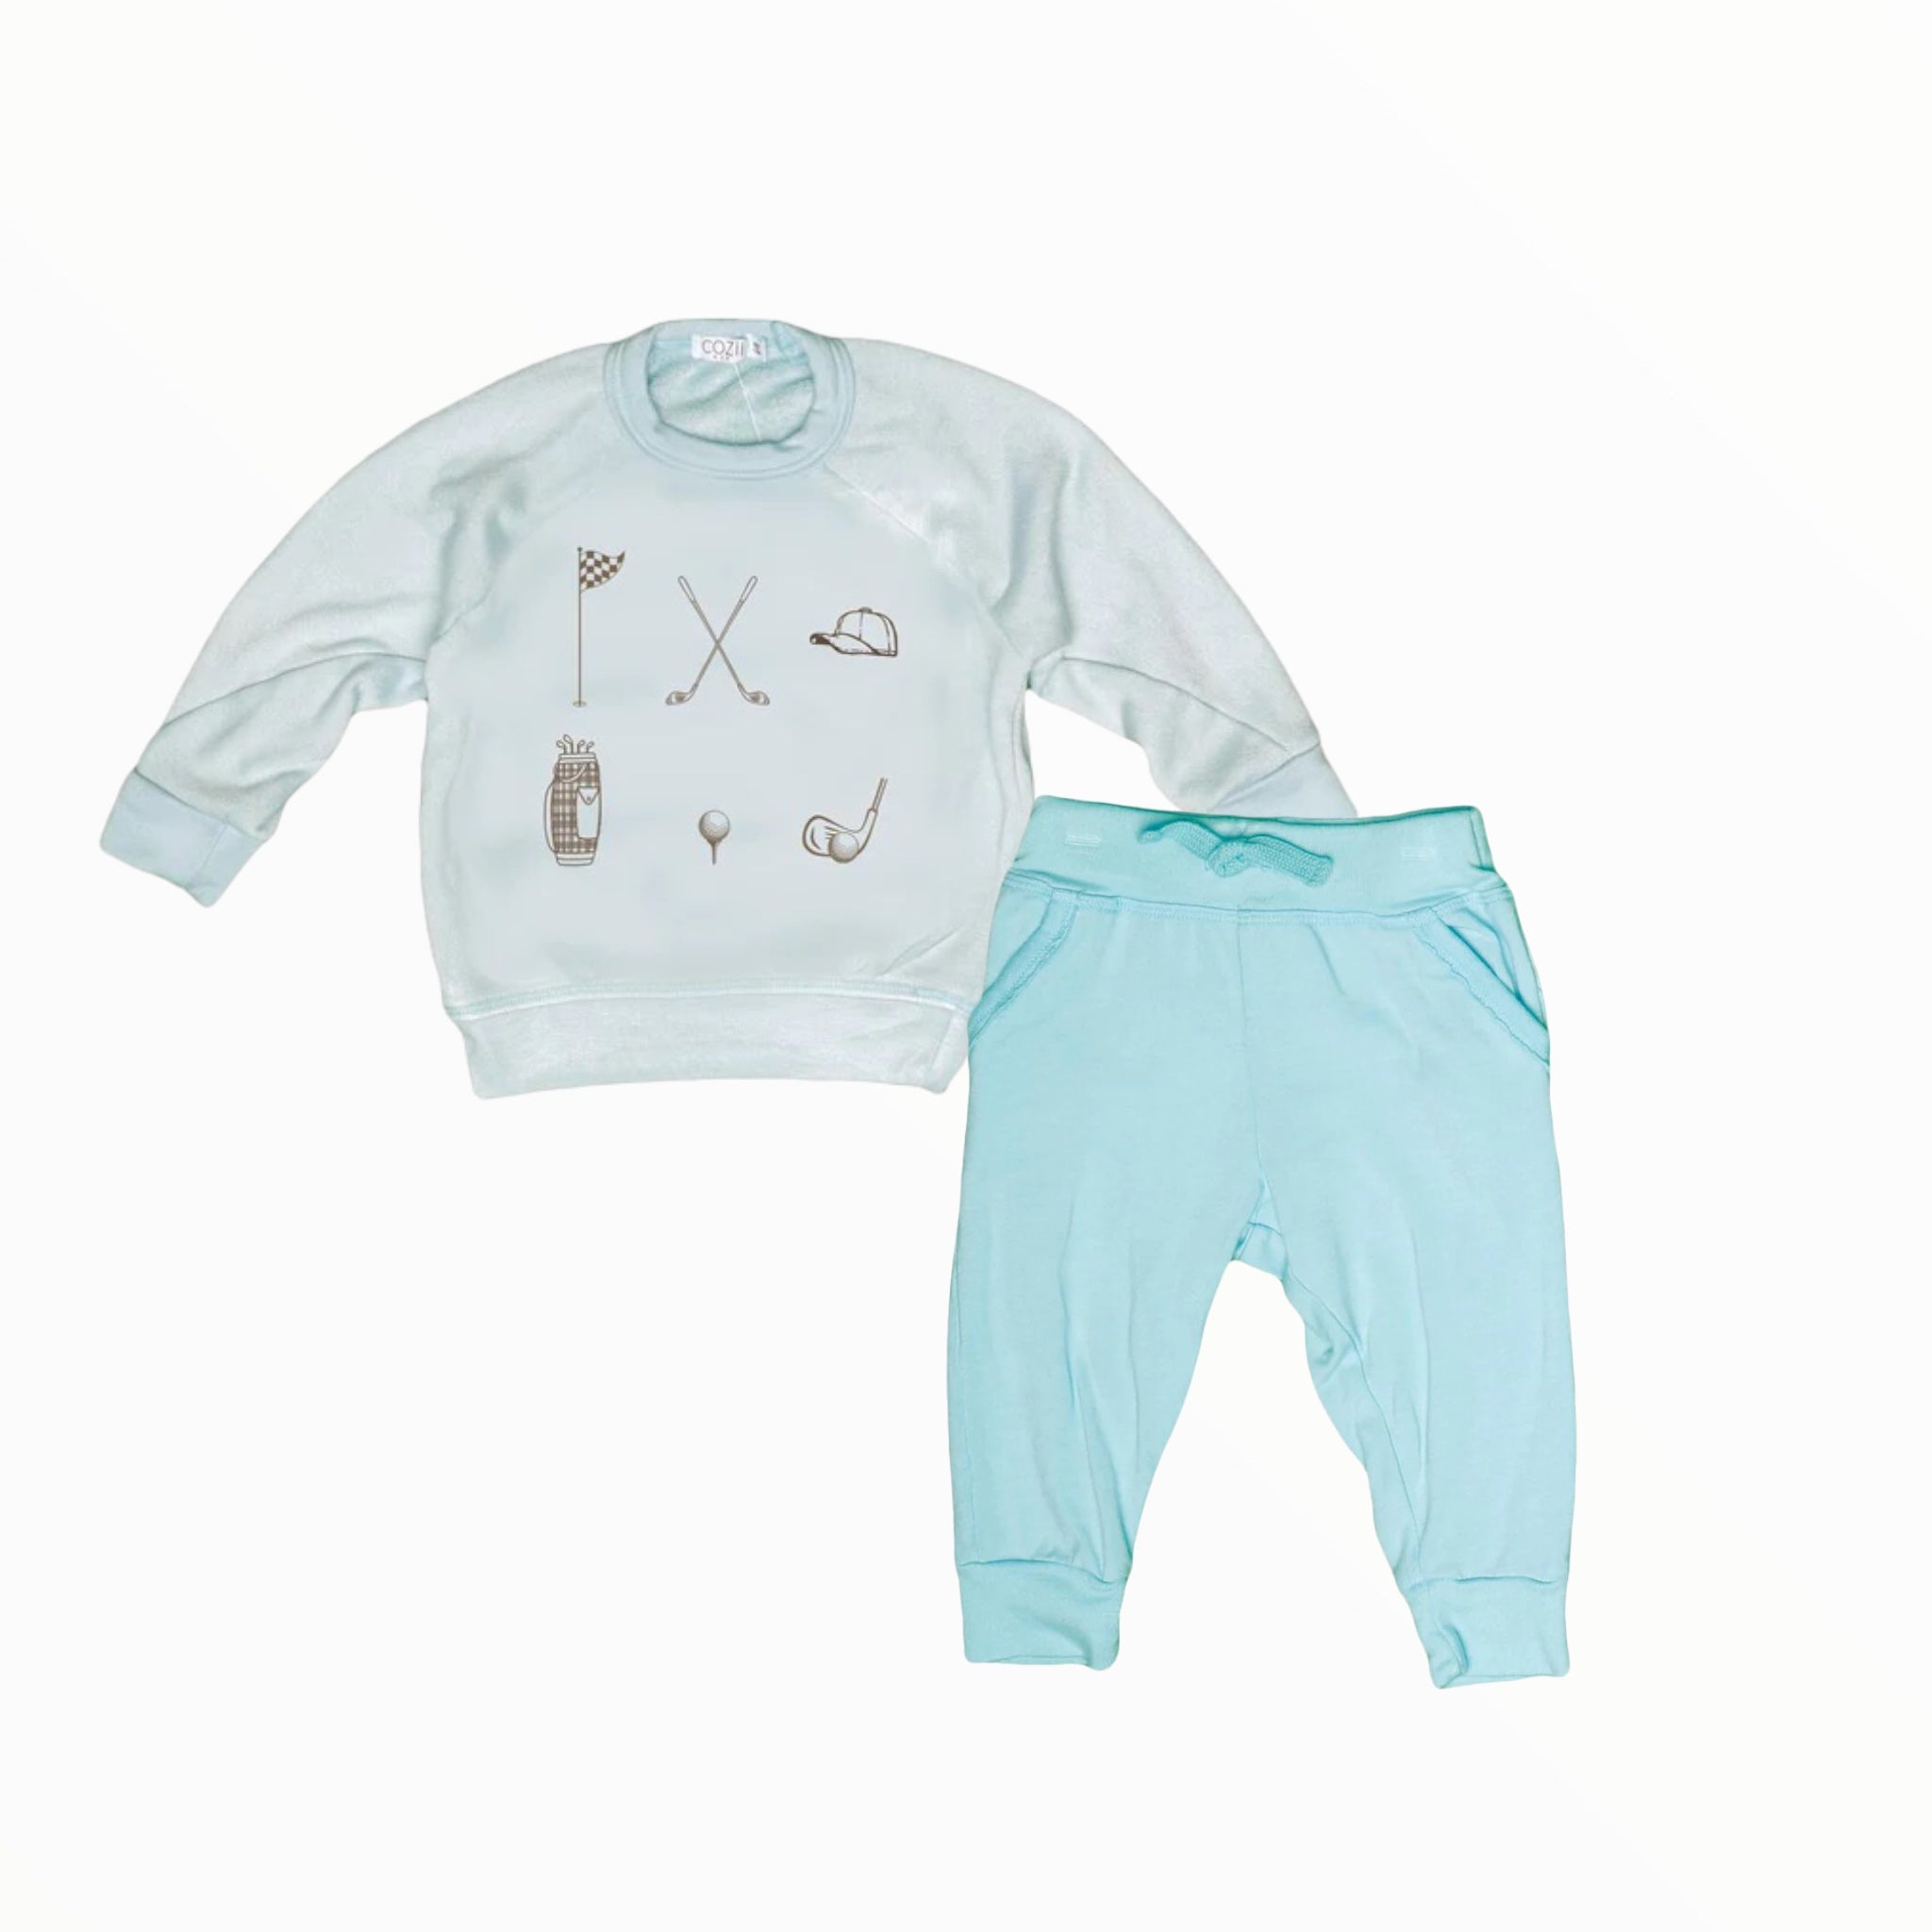 COZII BABY CREW AND JOGGER SET - BLUE/GOLF